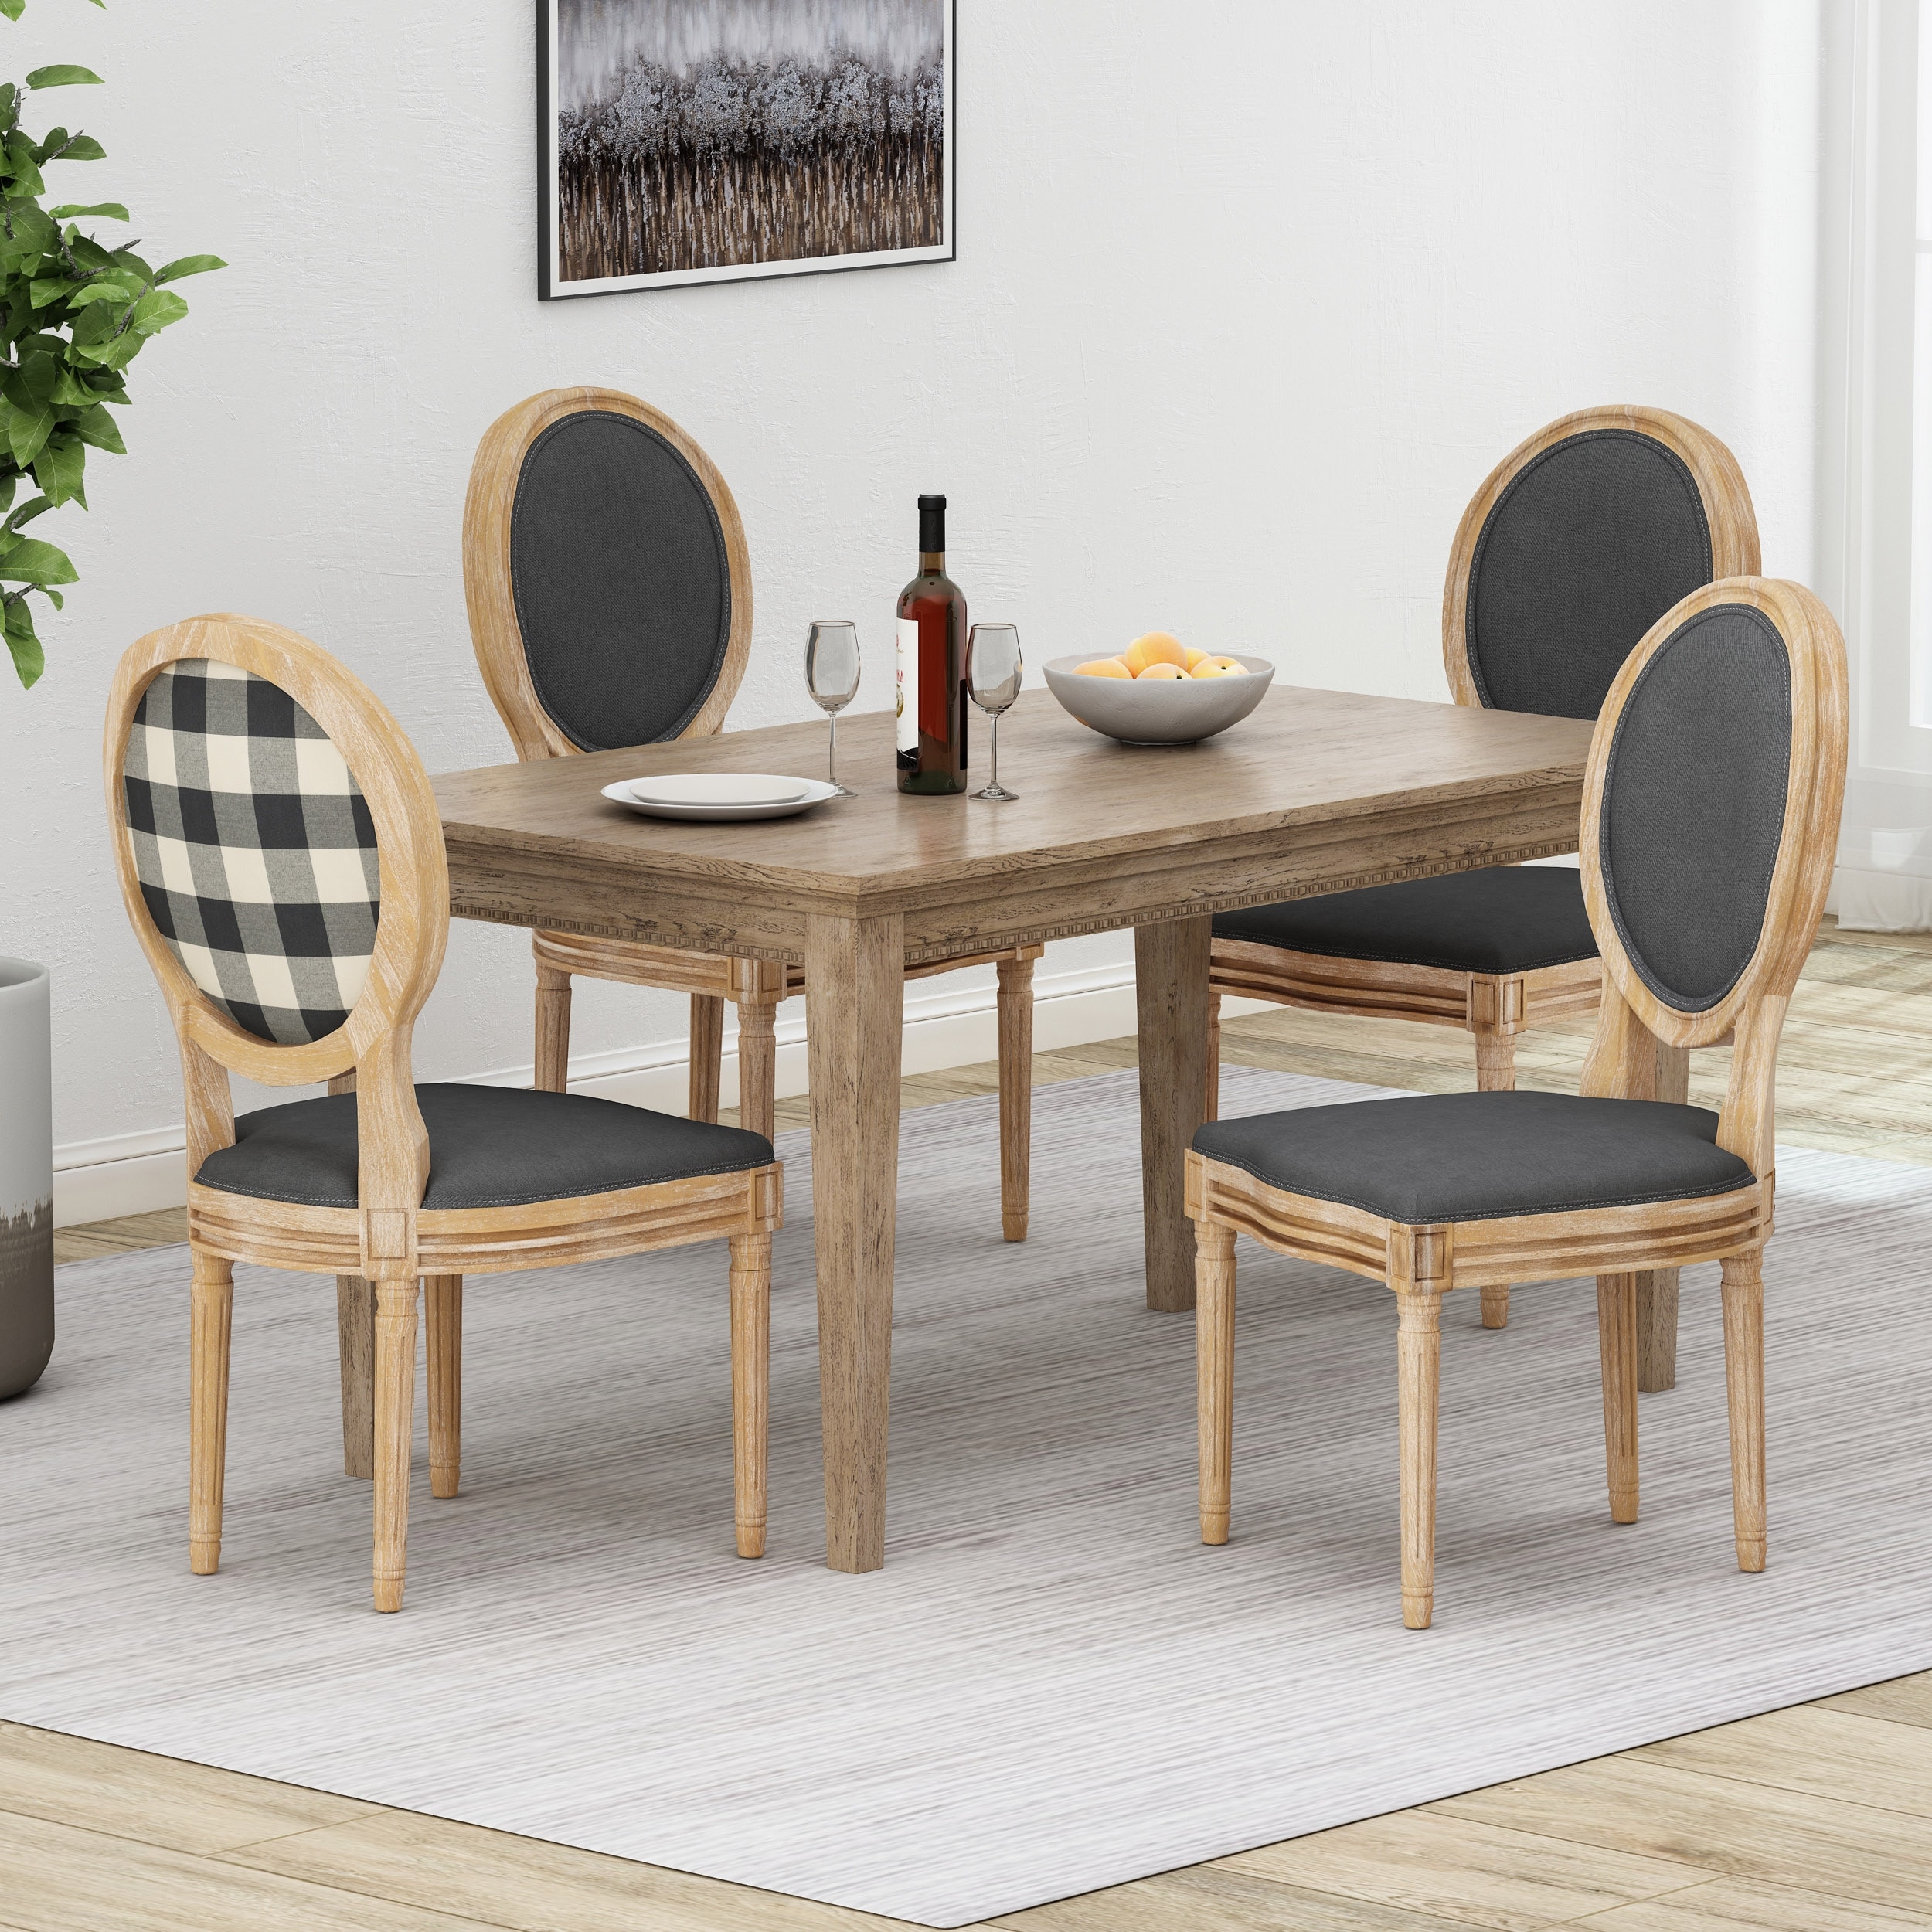 phinnaeus french country dining chairs set of 4christopher knight home